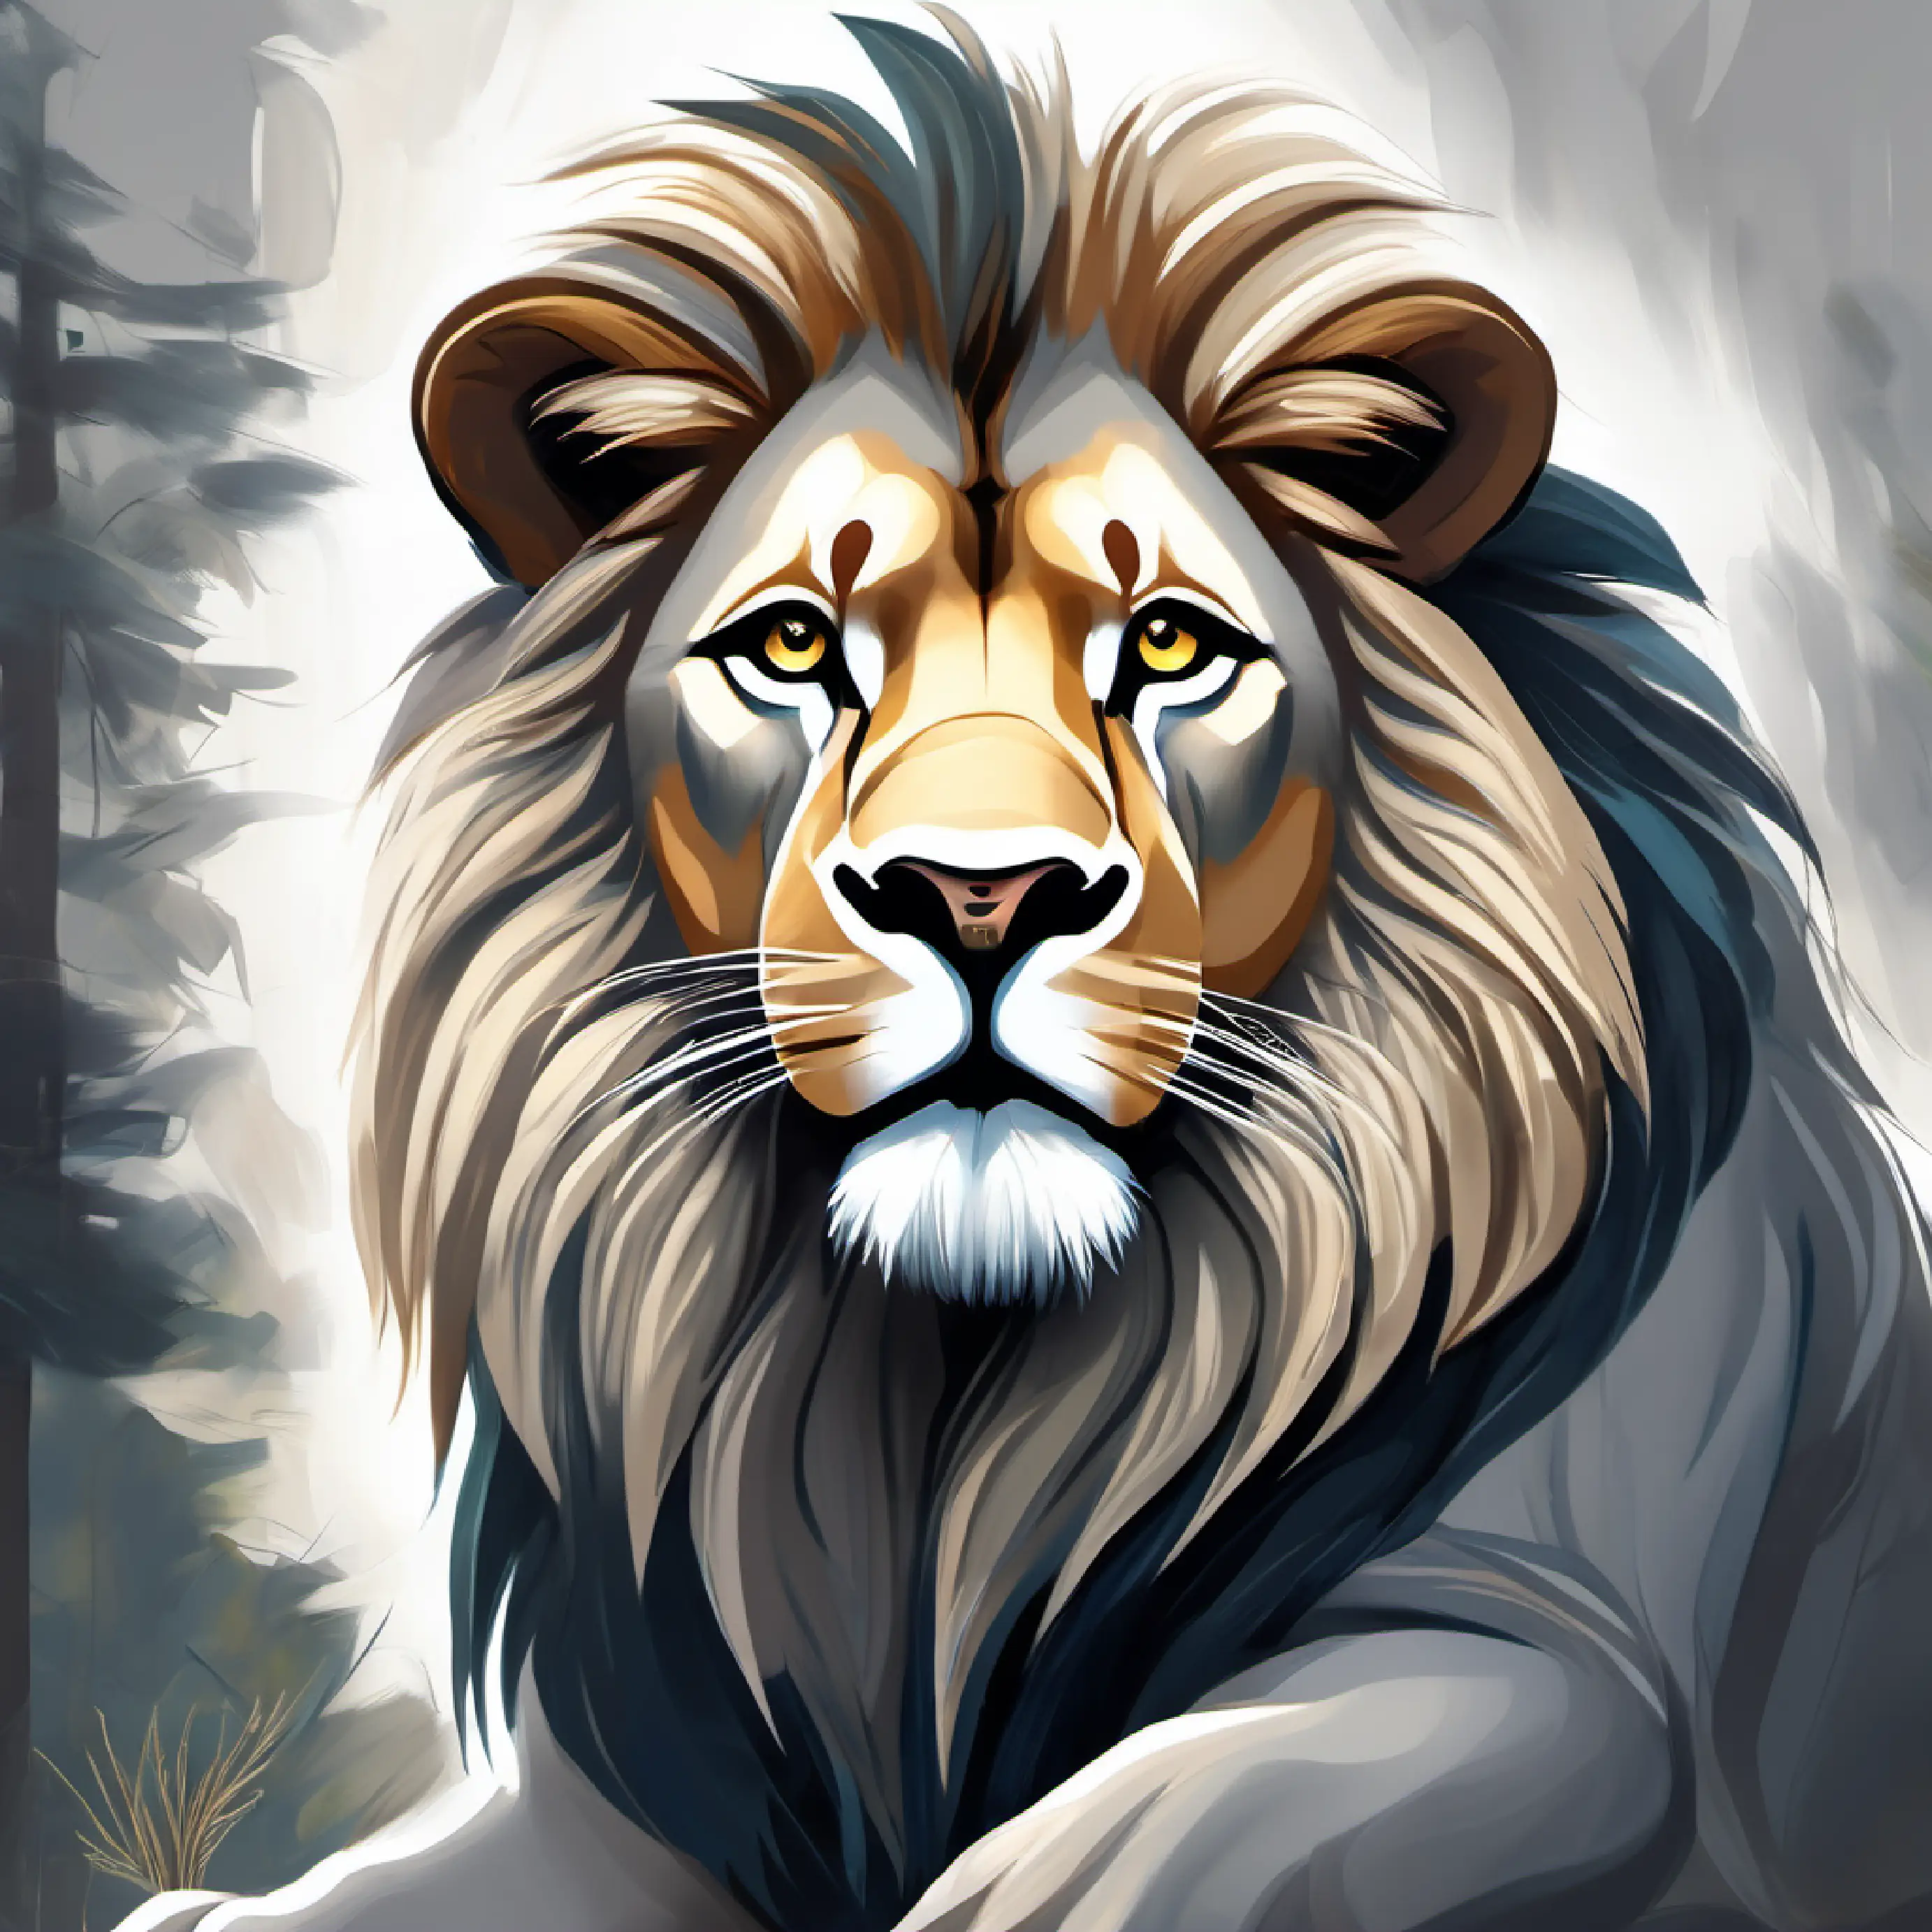 Lion continues positive communication with Majestic, gray, with wise and gentle eyes.